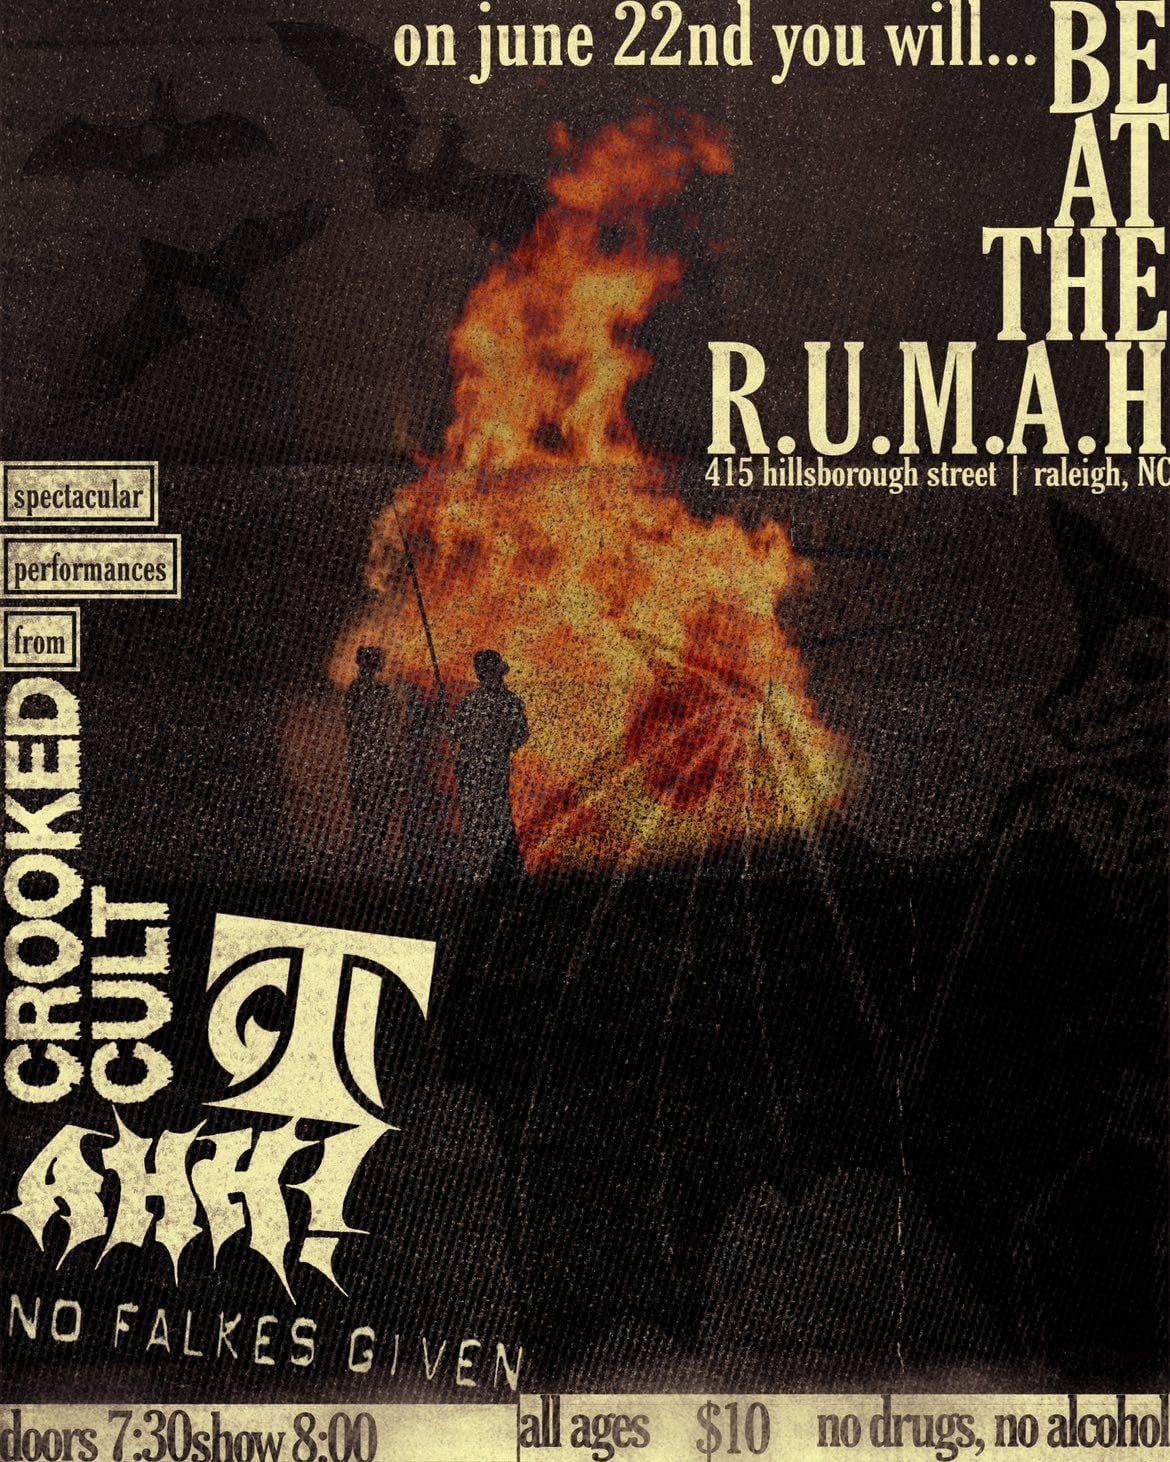 Crooked Cult, No Falkes Given, G.T.I., and Ahh! LIVE at The R.U.M.A.H.